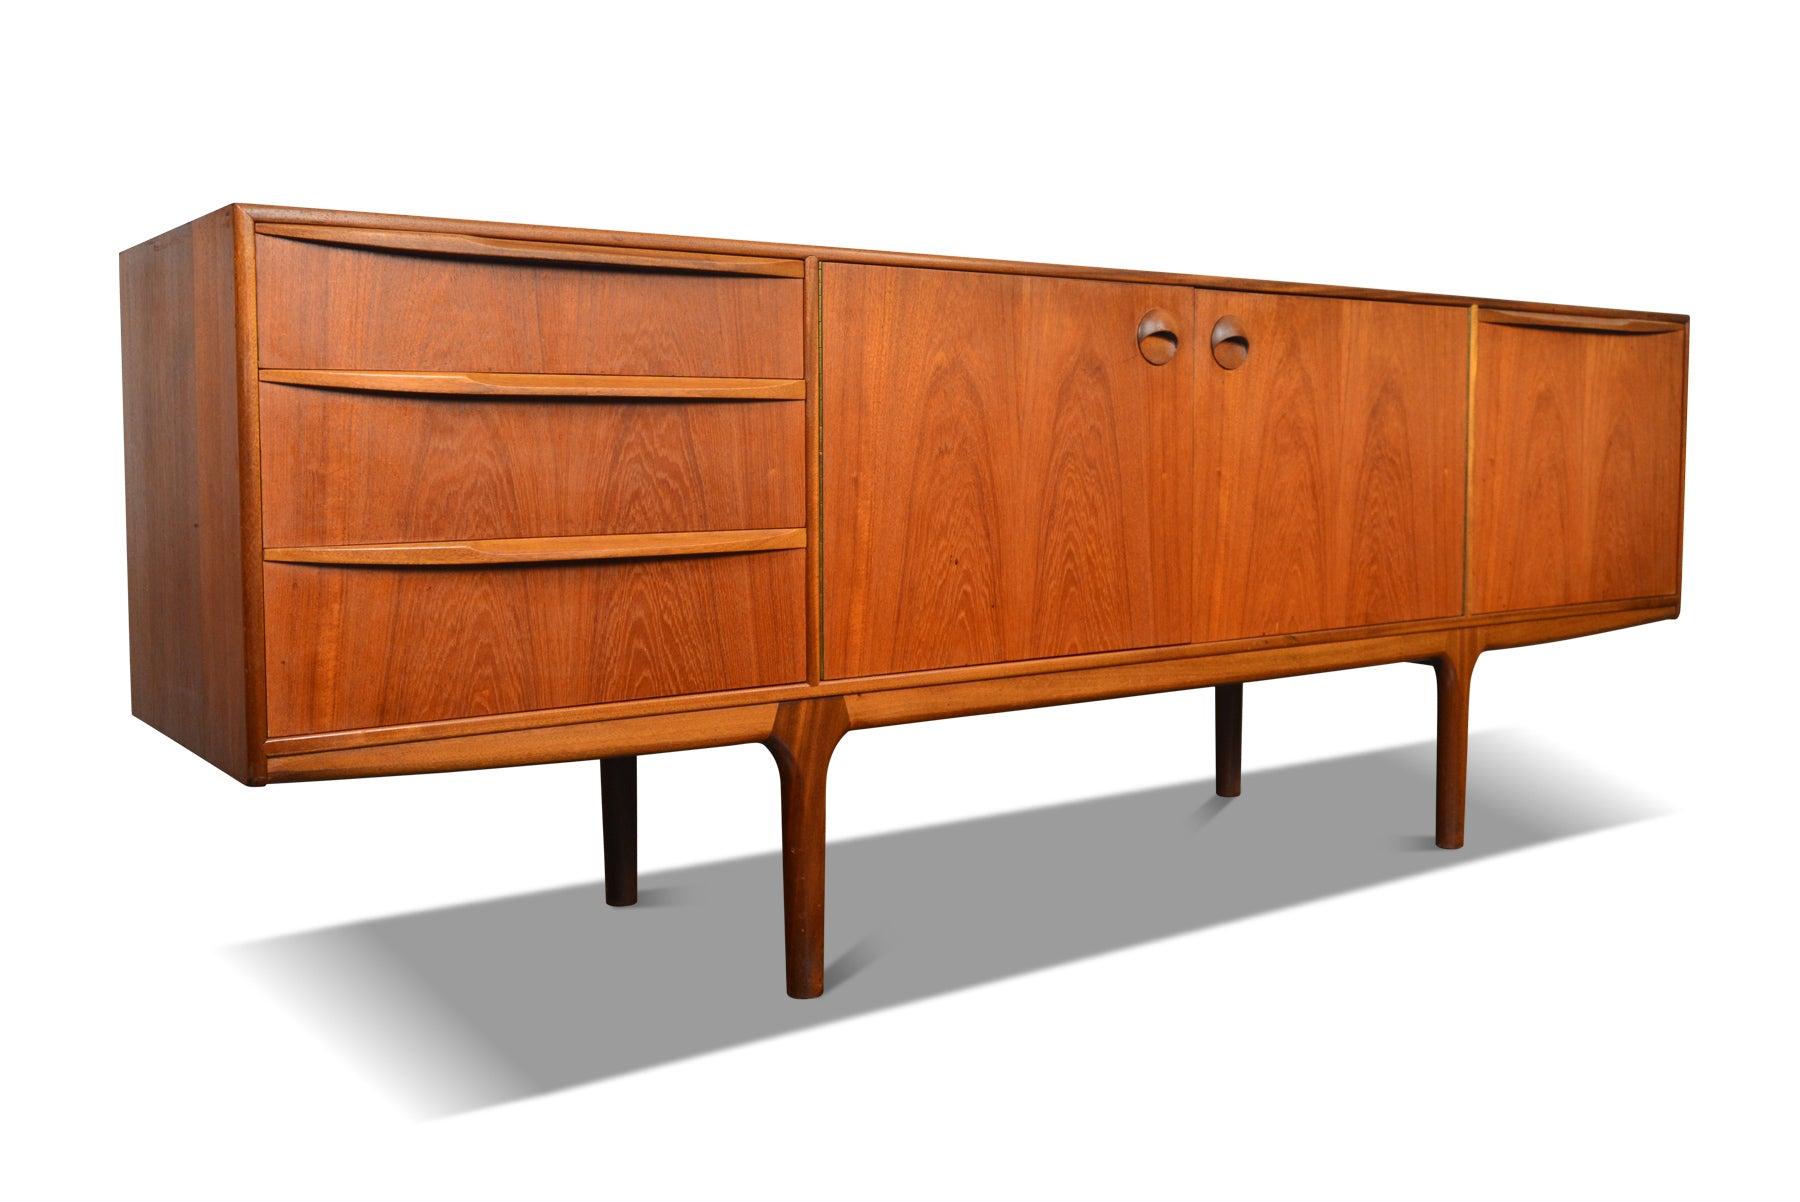 Origin: Scotland
Designer: Val Rossi
Manufacturer: McIntosh
Era: 1960s
Materials: Teak
Dimensions: 84” wide x 18” deep x 30” tall

Condition: In good original condition with light cosmetic wear.  Price includes refinishing / restoration

Lead time